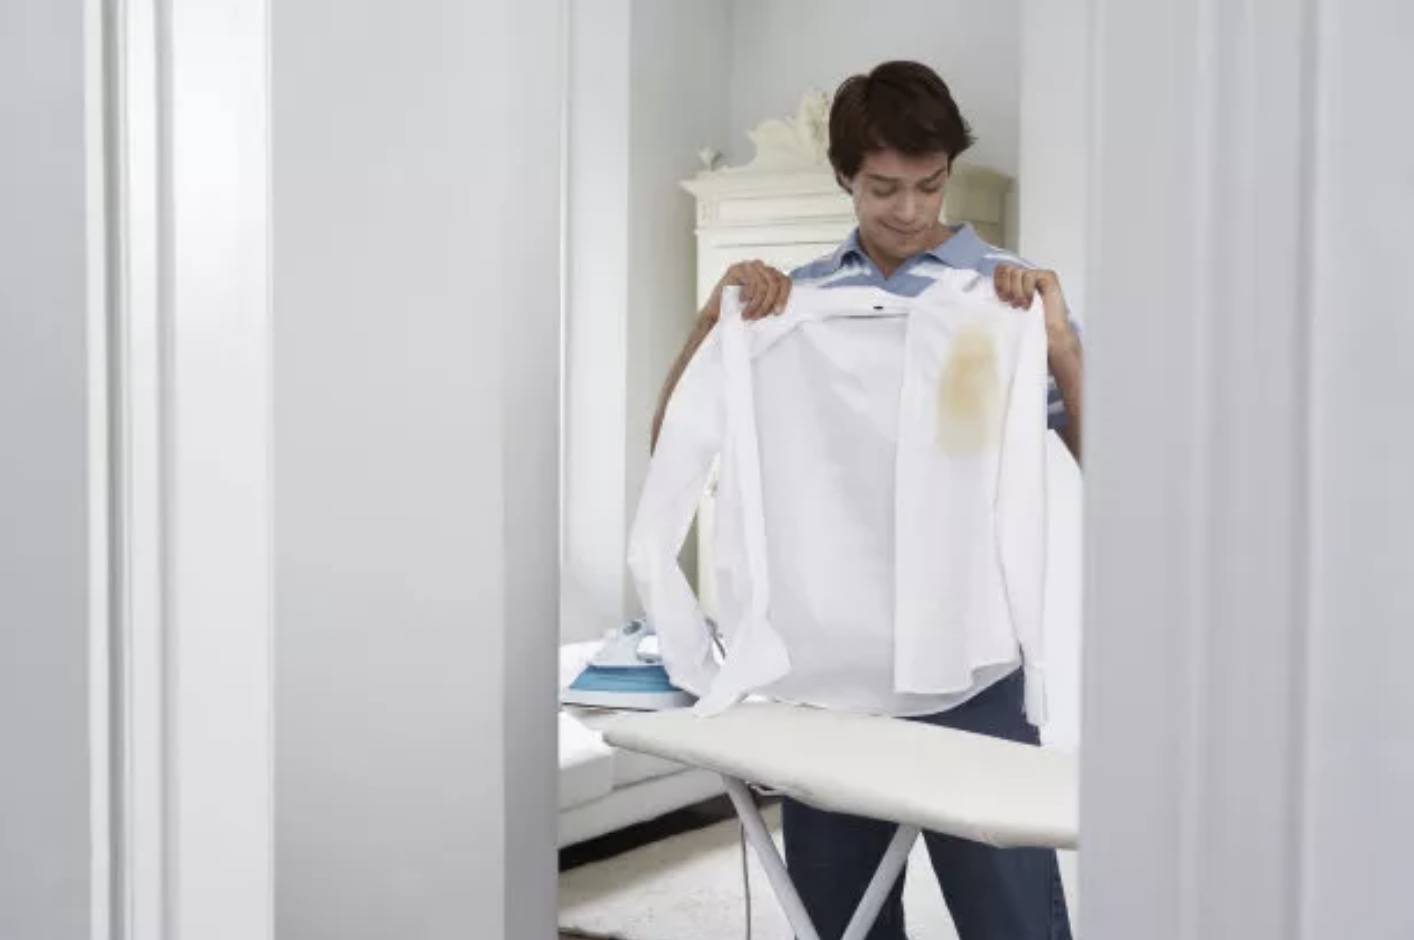 Common types of clothing stains